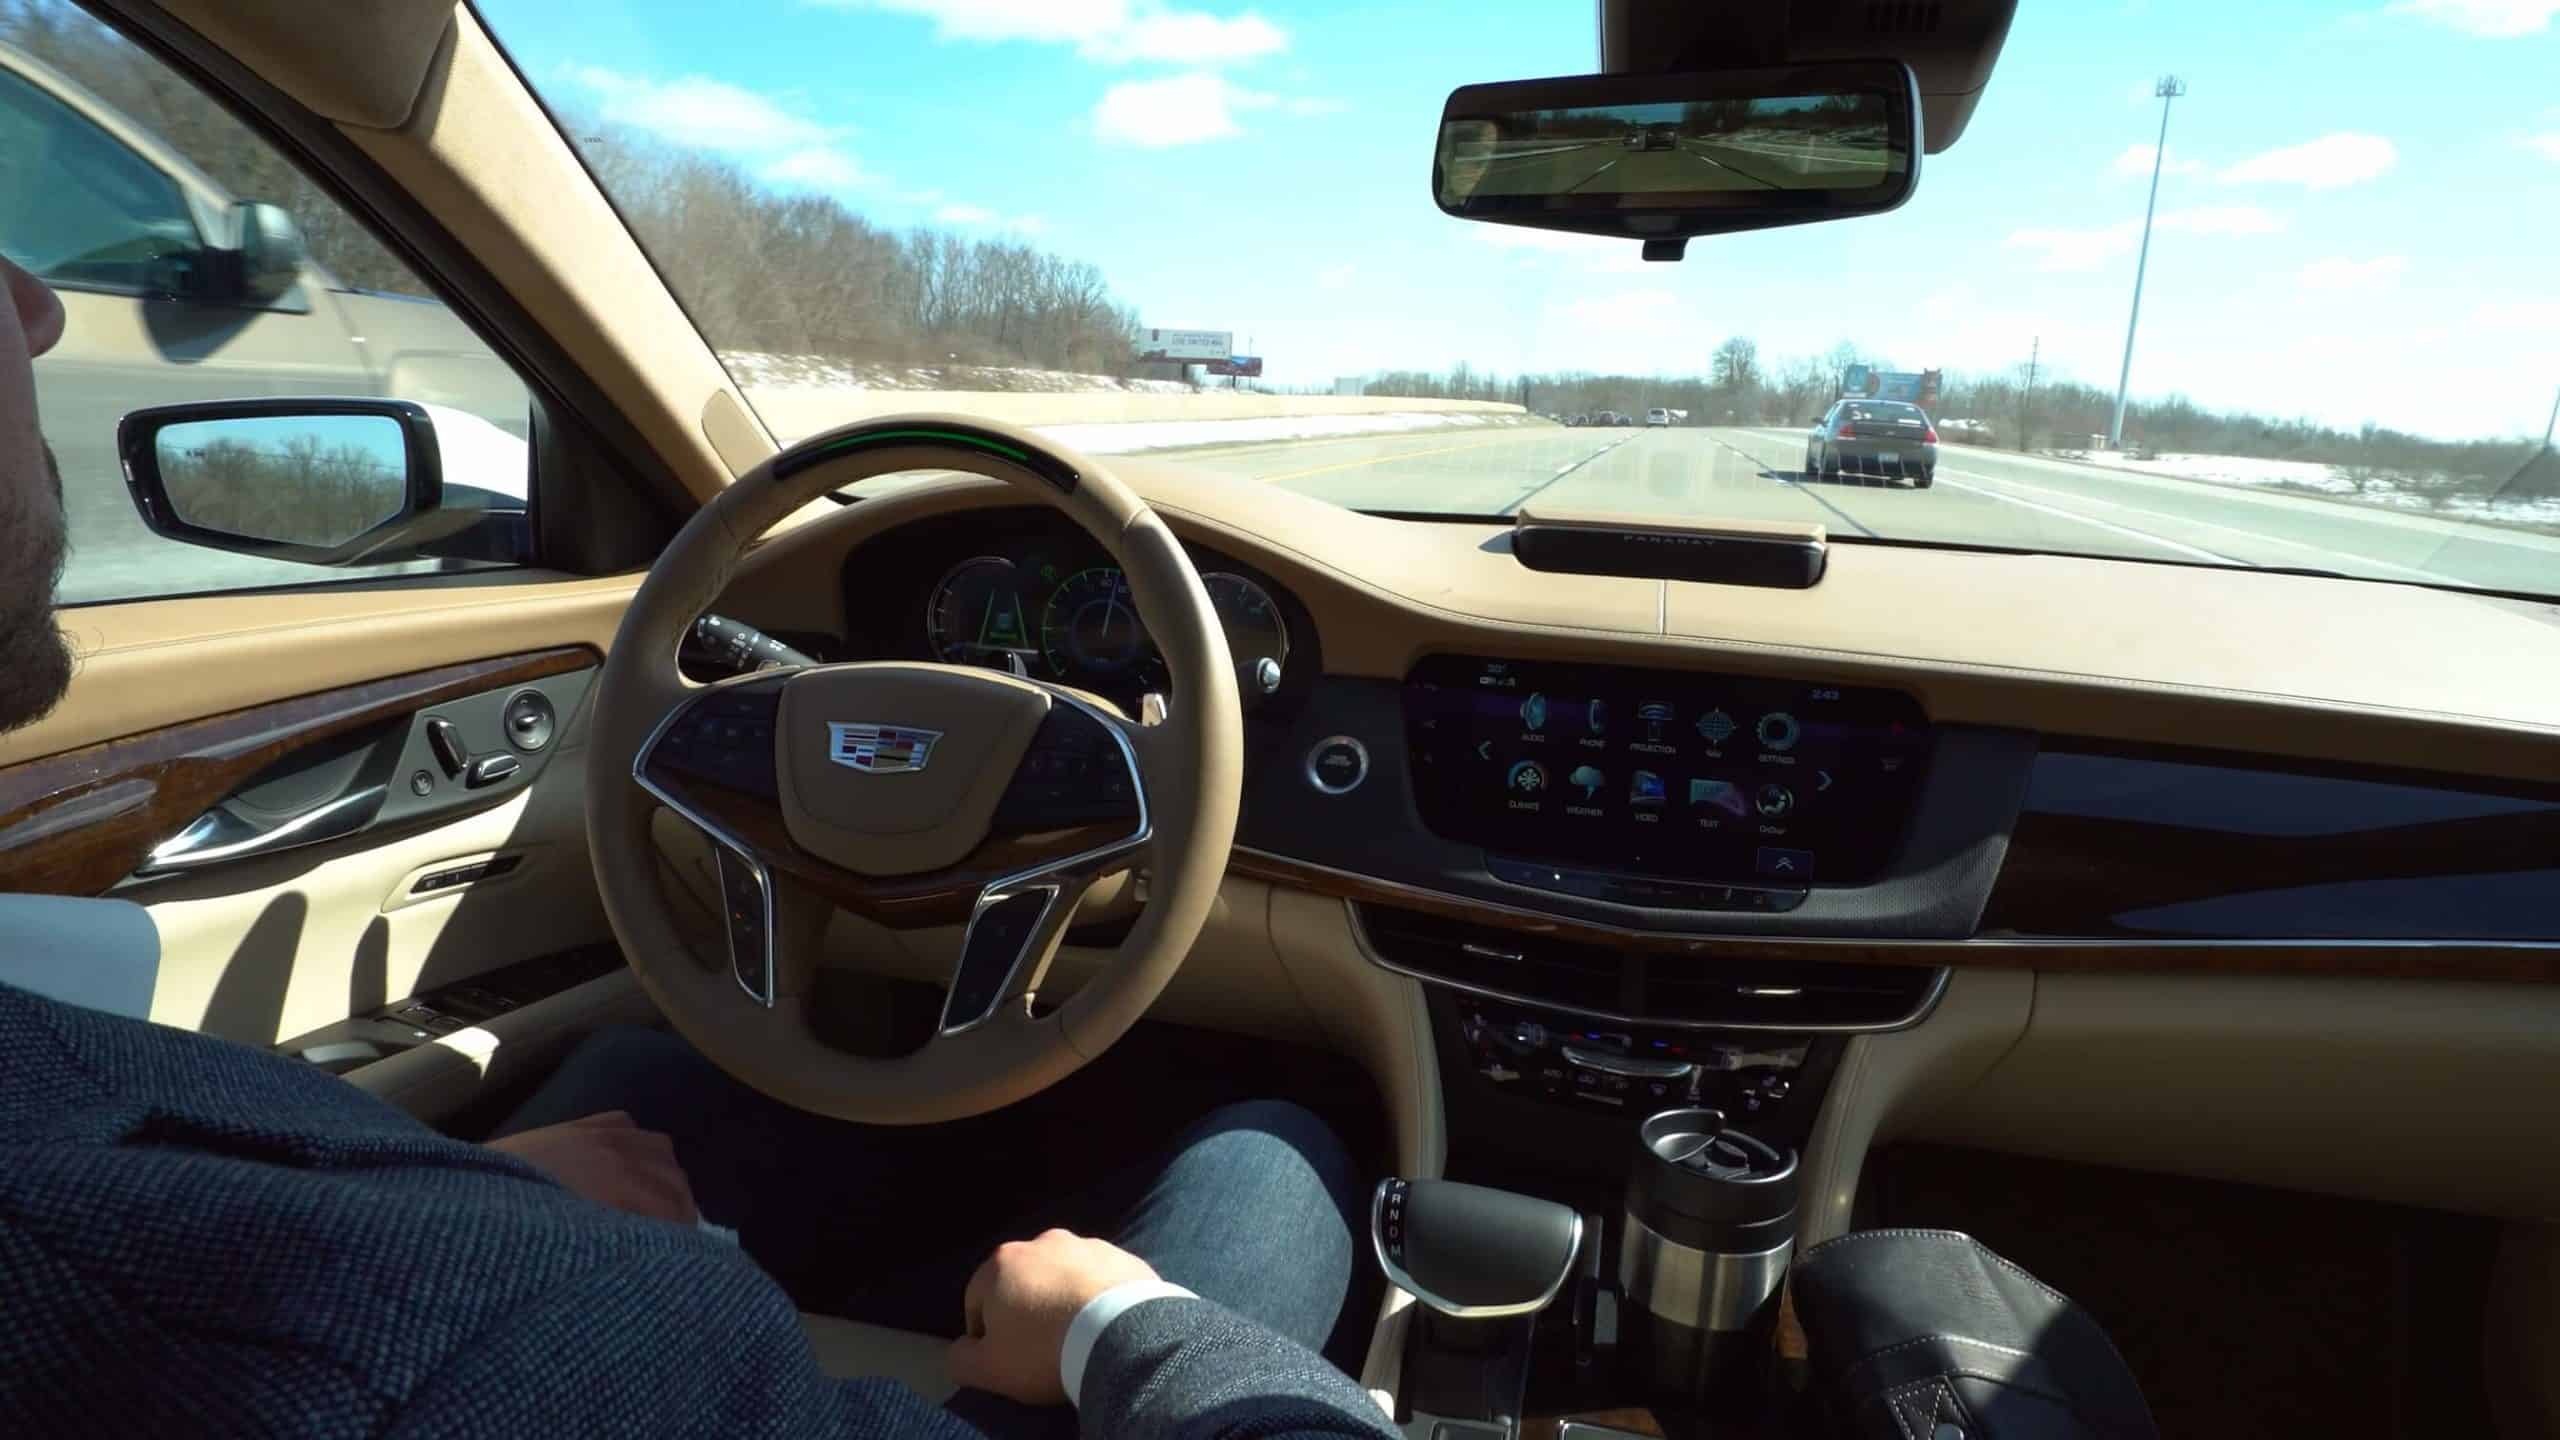 Cadillac Super Cruise Sets the Standard for Hands-Free Highway DrivingSuper Cruise